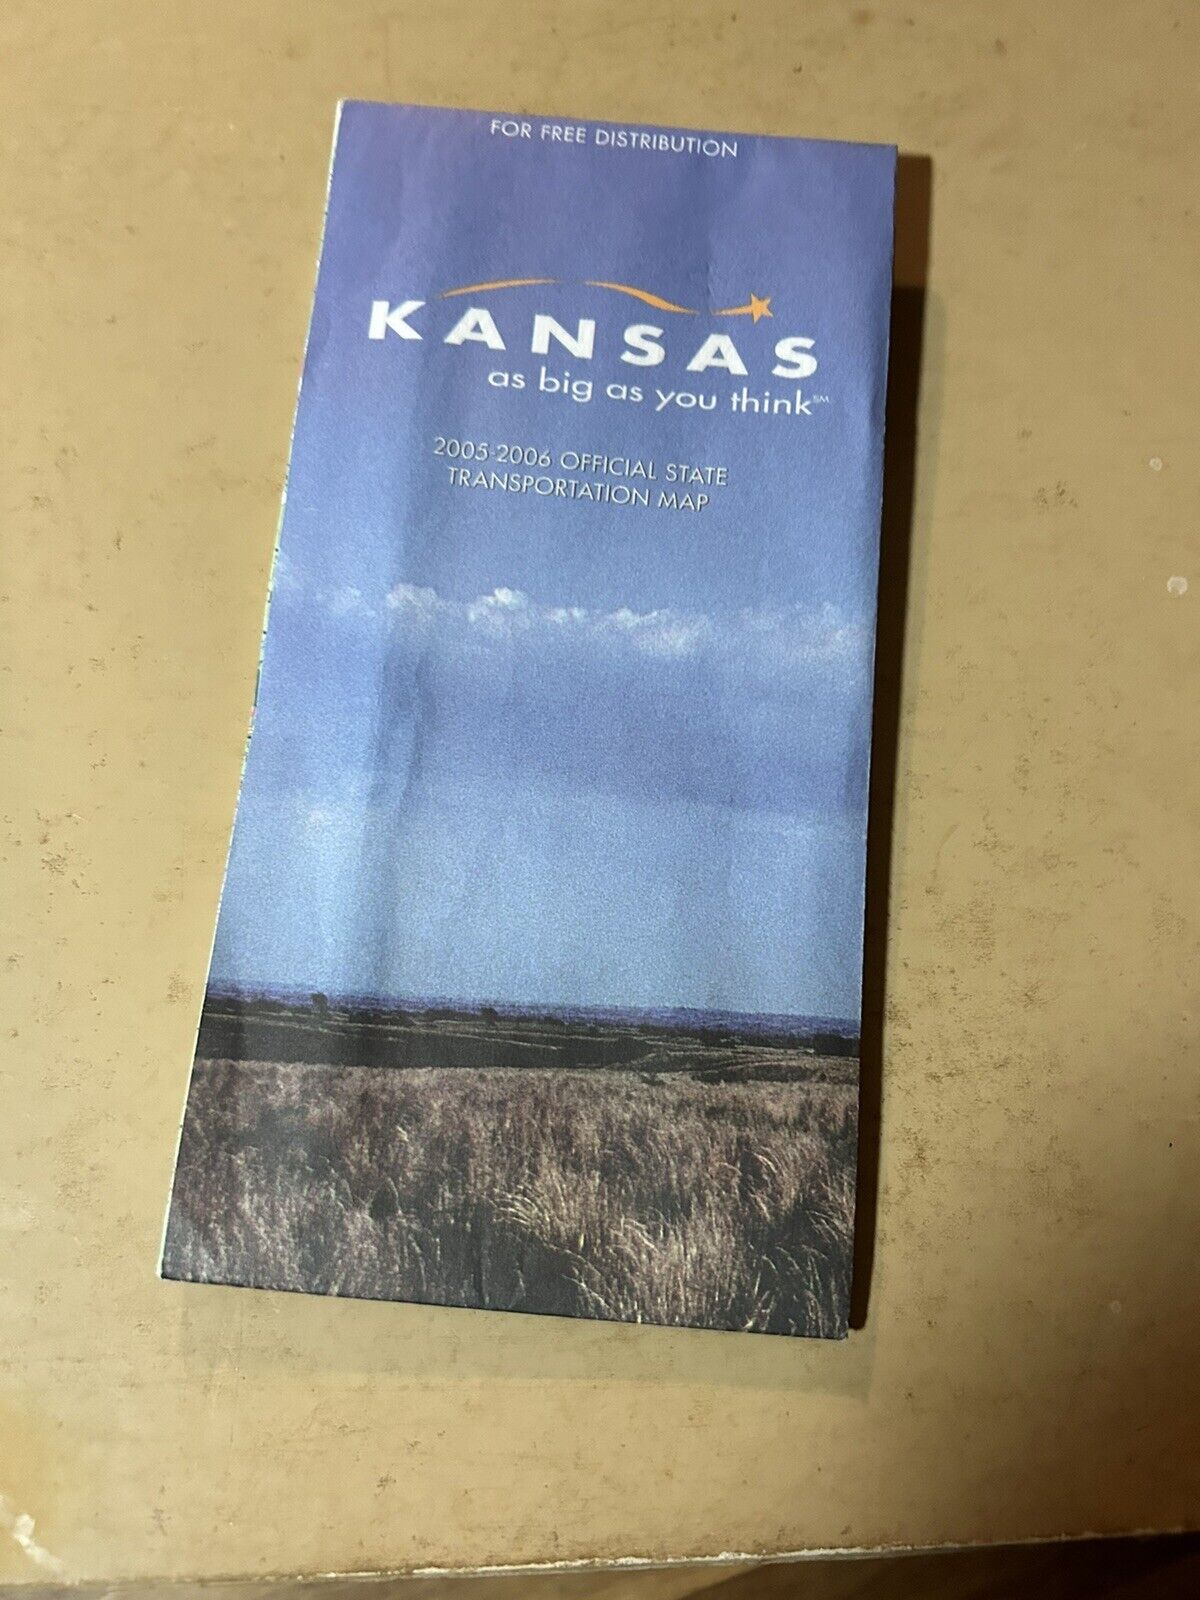 2005-2006 OFFICIAL STATE TRANSPORTATION MAP KANSAS-AS BIG AS YOU THINK